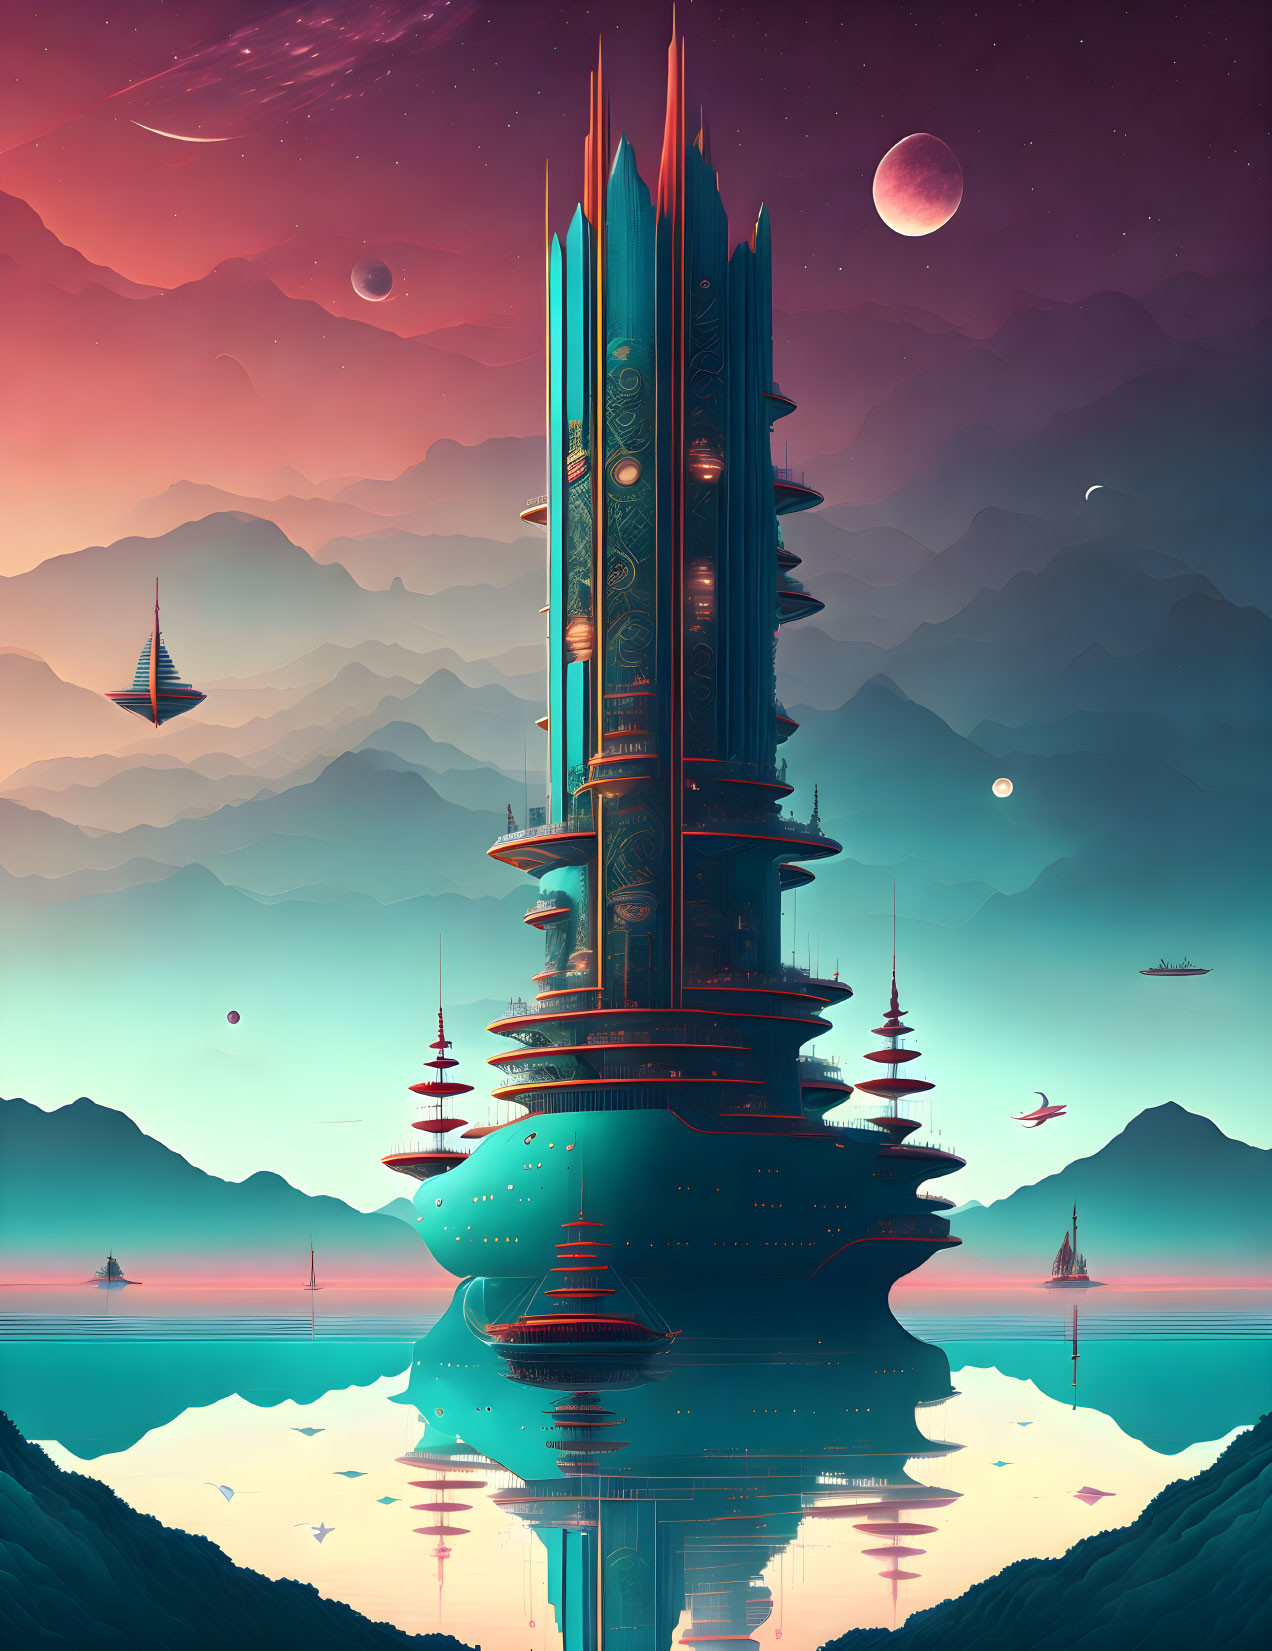 Futuristic tower by calm lake with floating ships